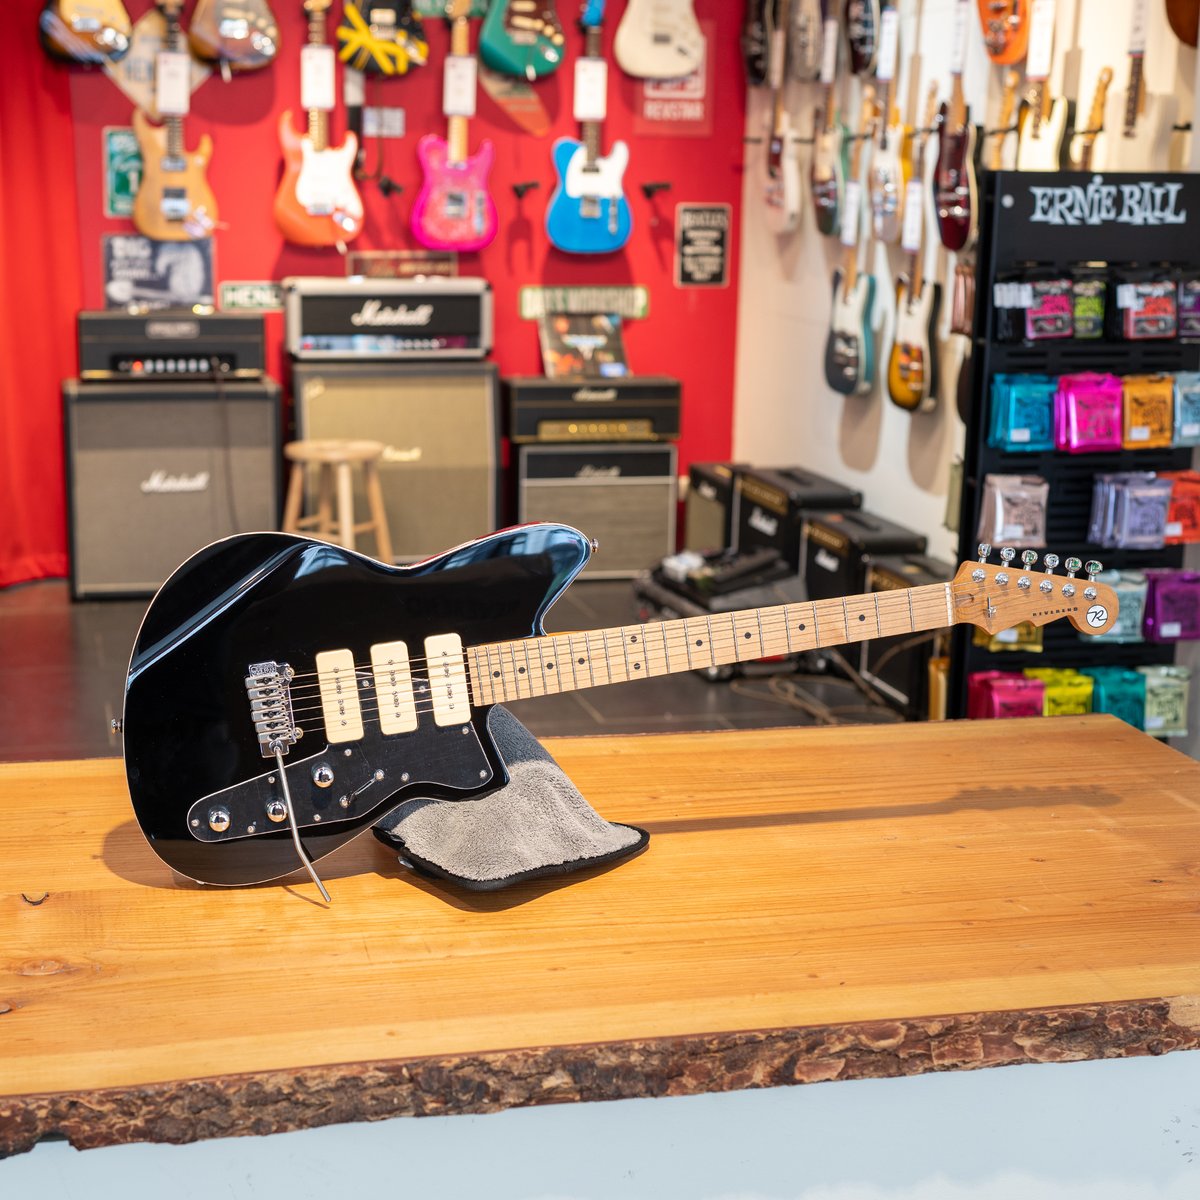 The Reverend Jetstream 390 midnight black. Whatever the style ... Fat, raw and bluesy but with just the right amount of bite to cut through. #groovestreet98bxl #groovestreet98 #groovestreet #reverendguitars #jetstream390 #chargerHB #mantaray #doubleagentw #doubleagentog